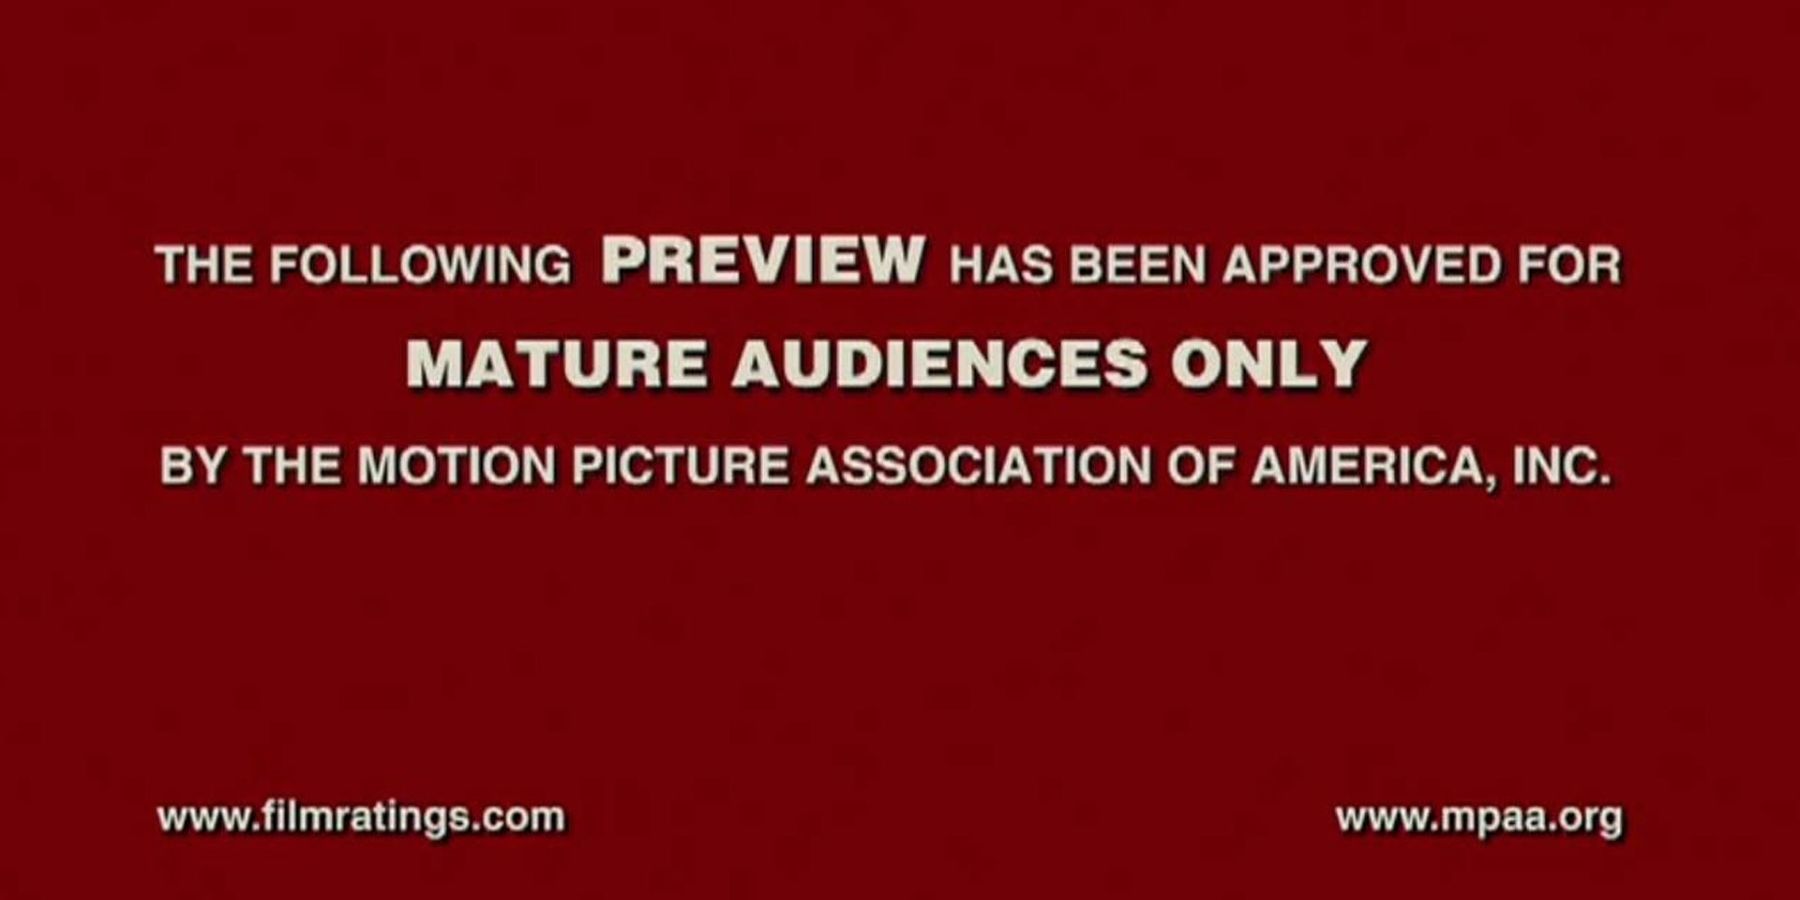 The Color of the Background Preceding Movie Trailers Actually